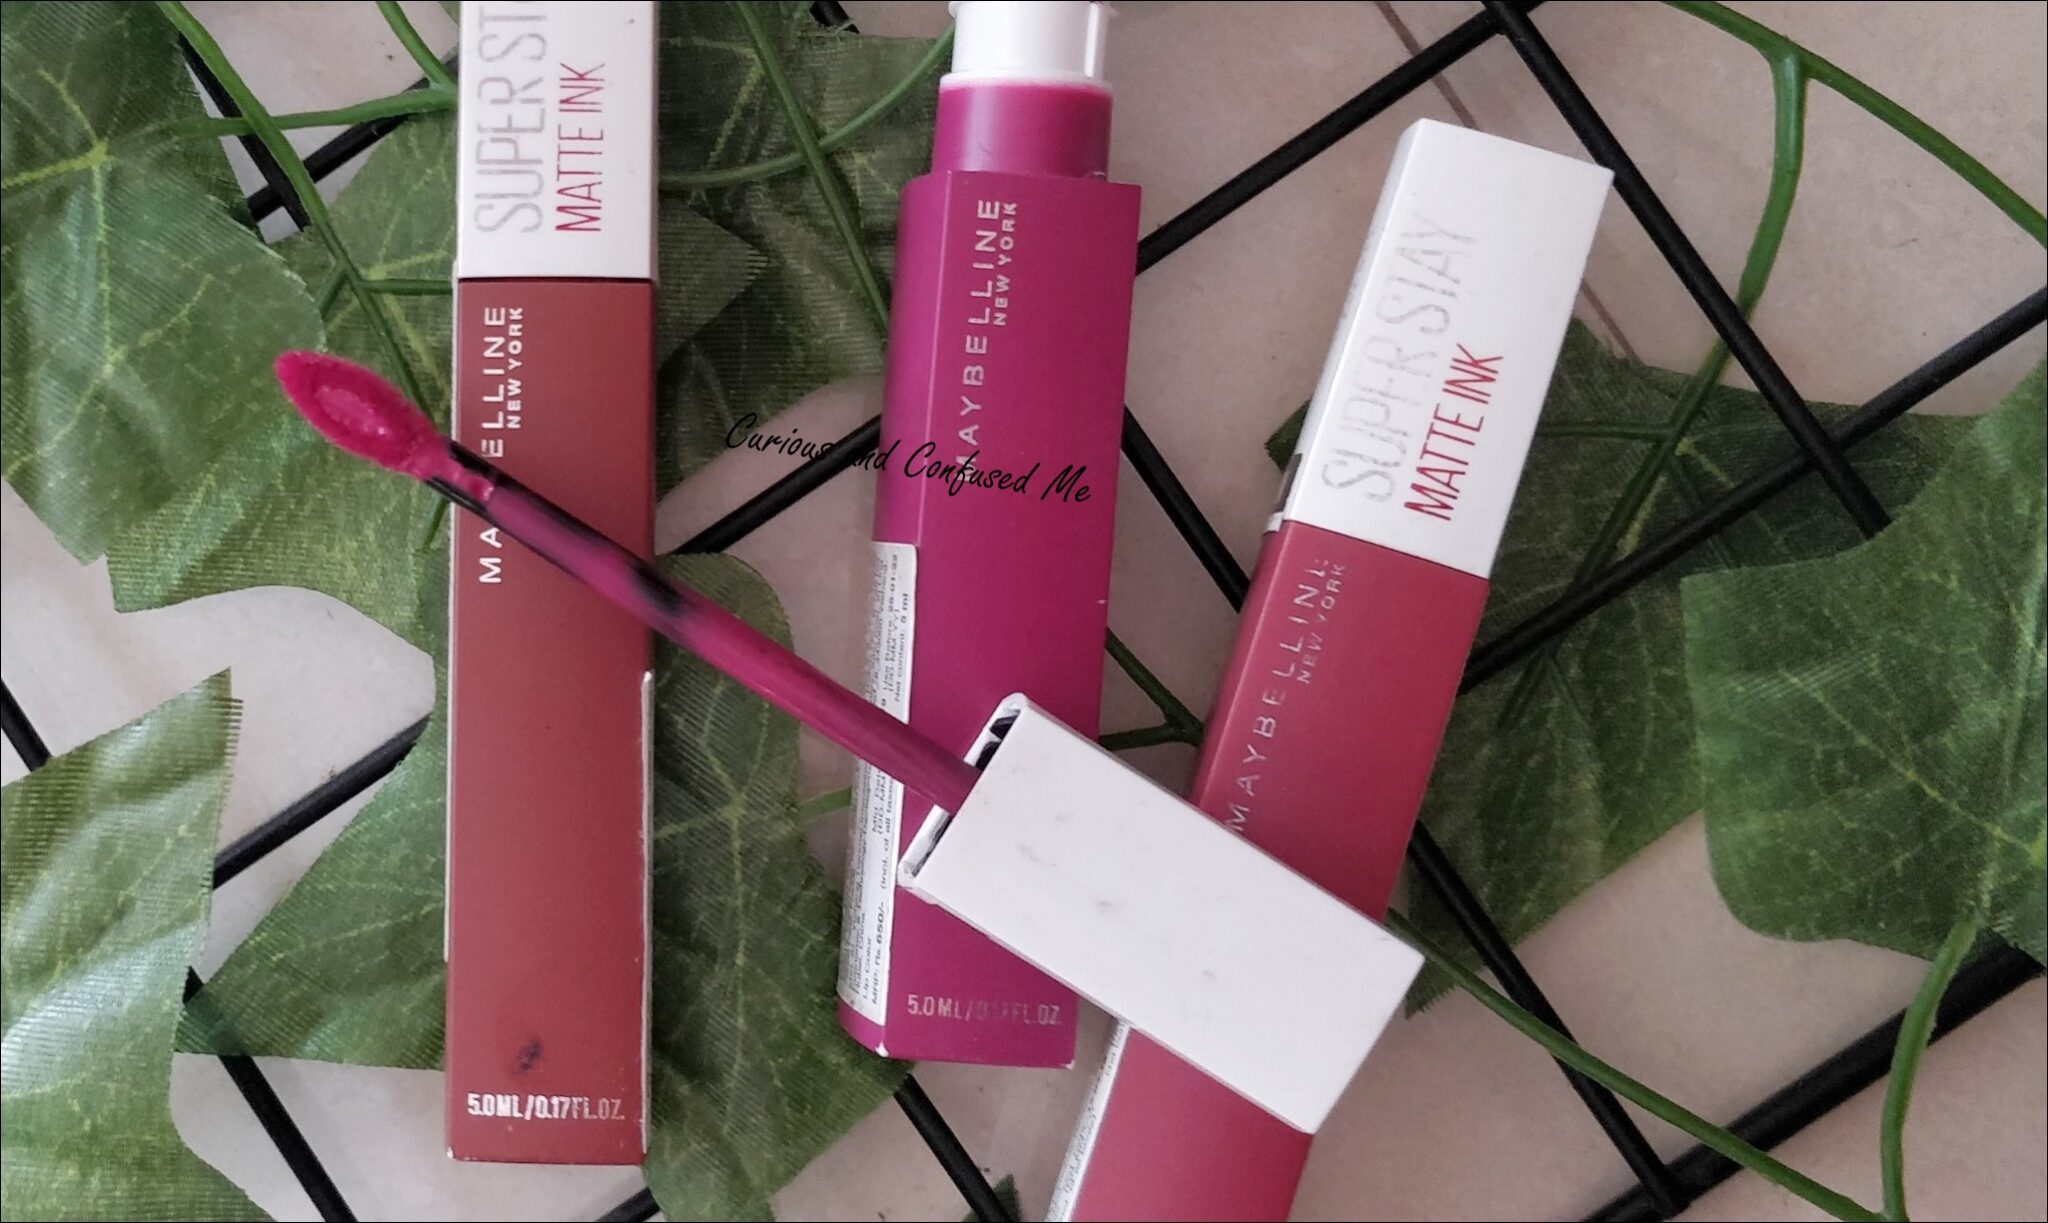 – Confused Review New Matte and Curious me lipstick Superstay Liquid York Ink Maybelline